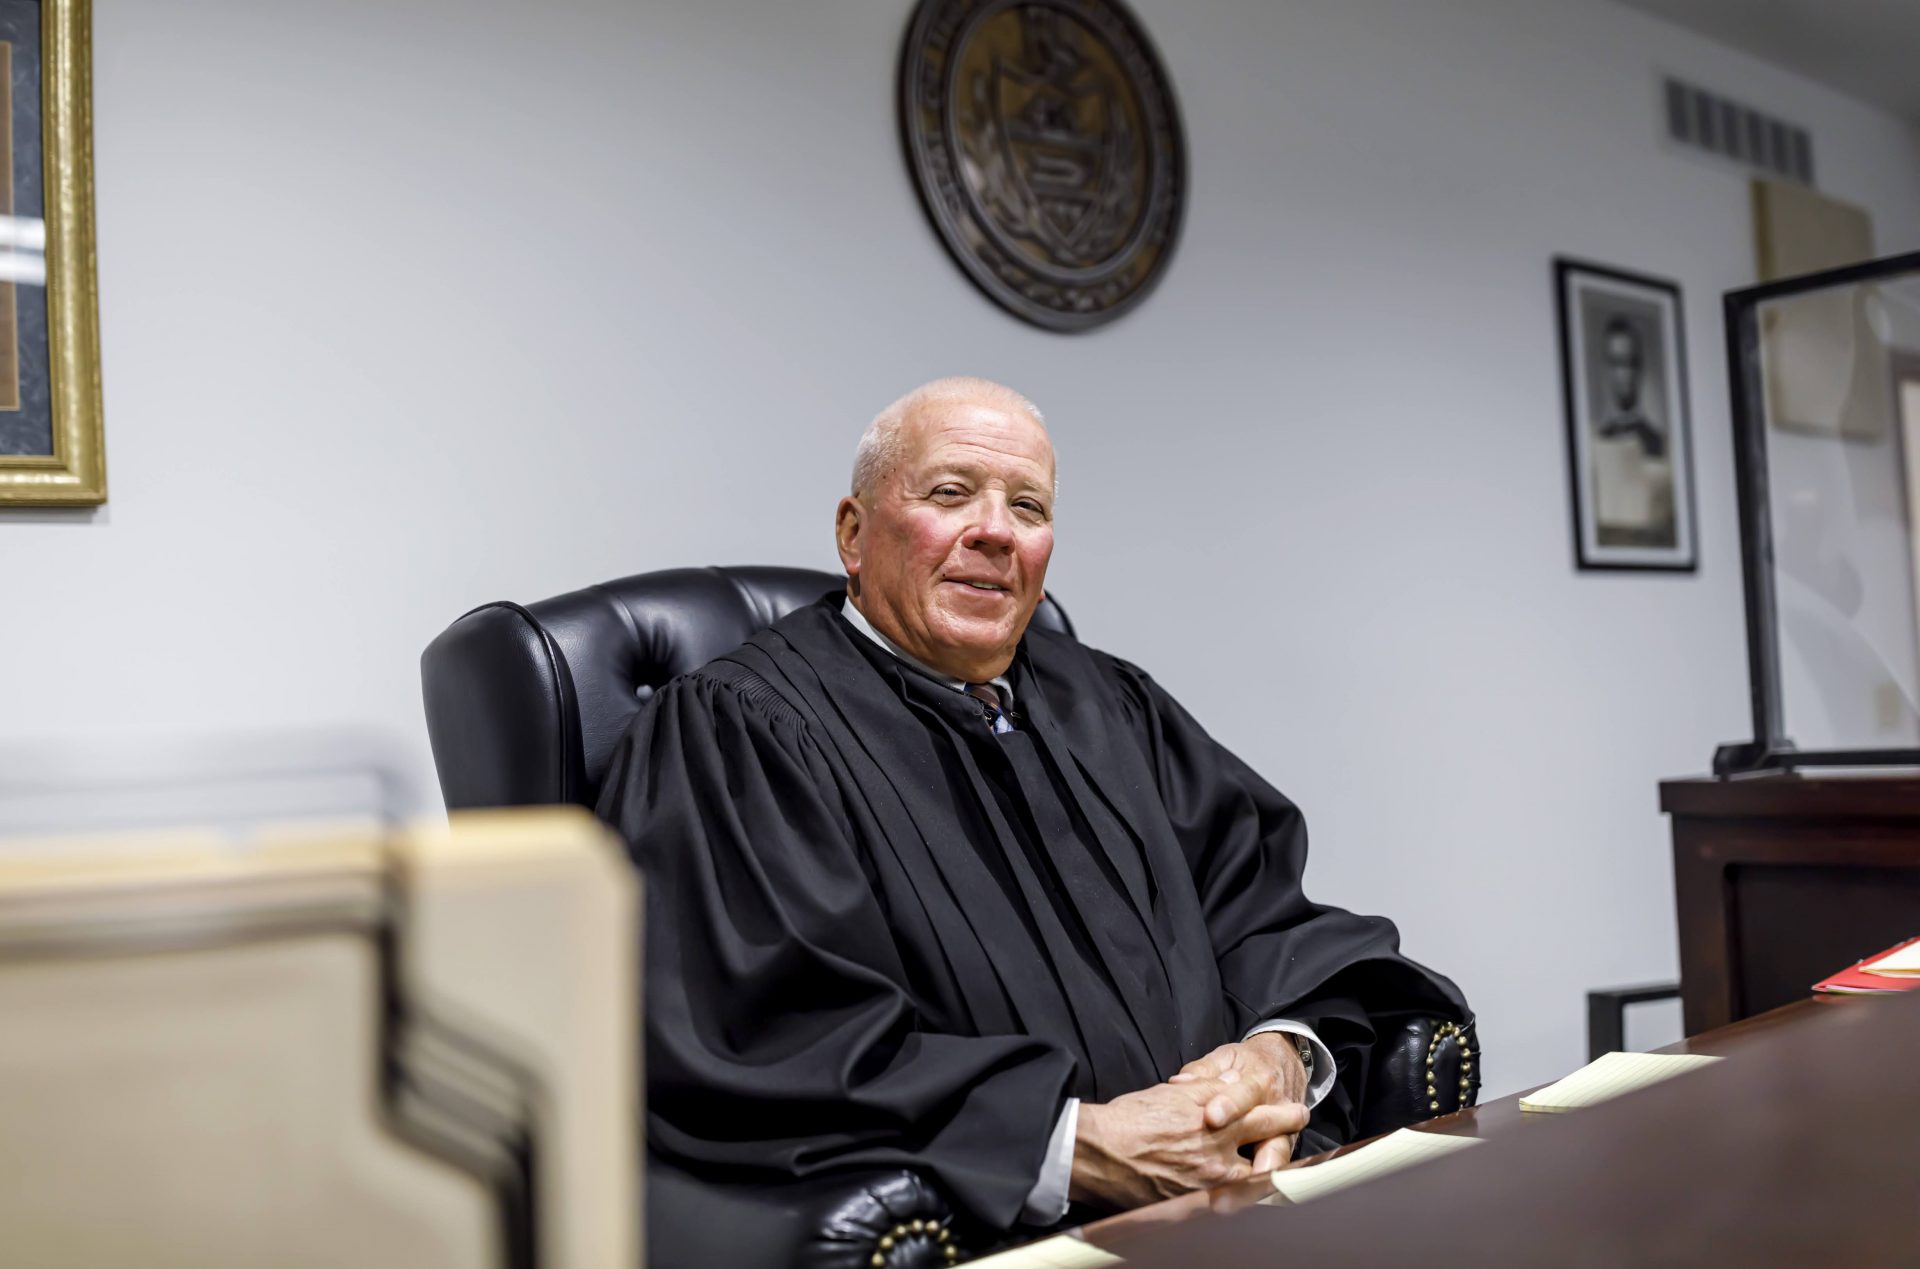 Magisterial District Judge David Judy, president of the Dauphin County Magisterial District Judge Association, said he has always considered being a district judge a full-time job, but knows not all of his colleagues agree.